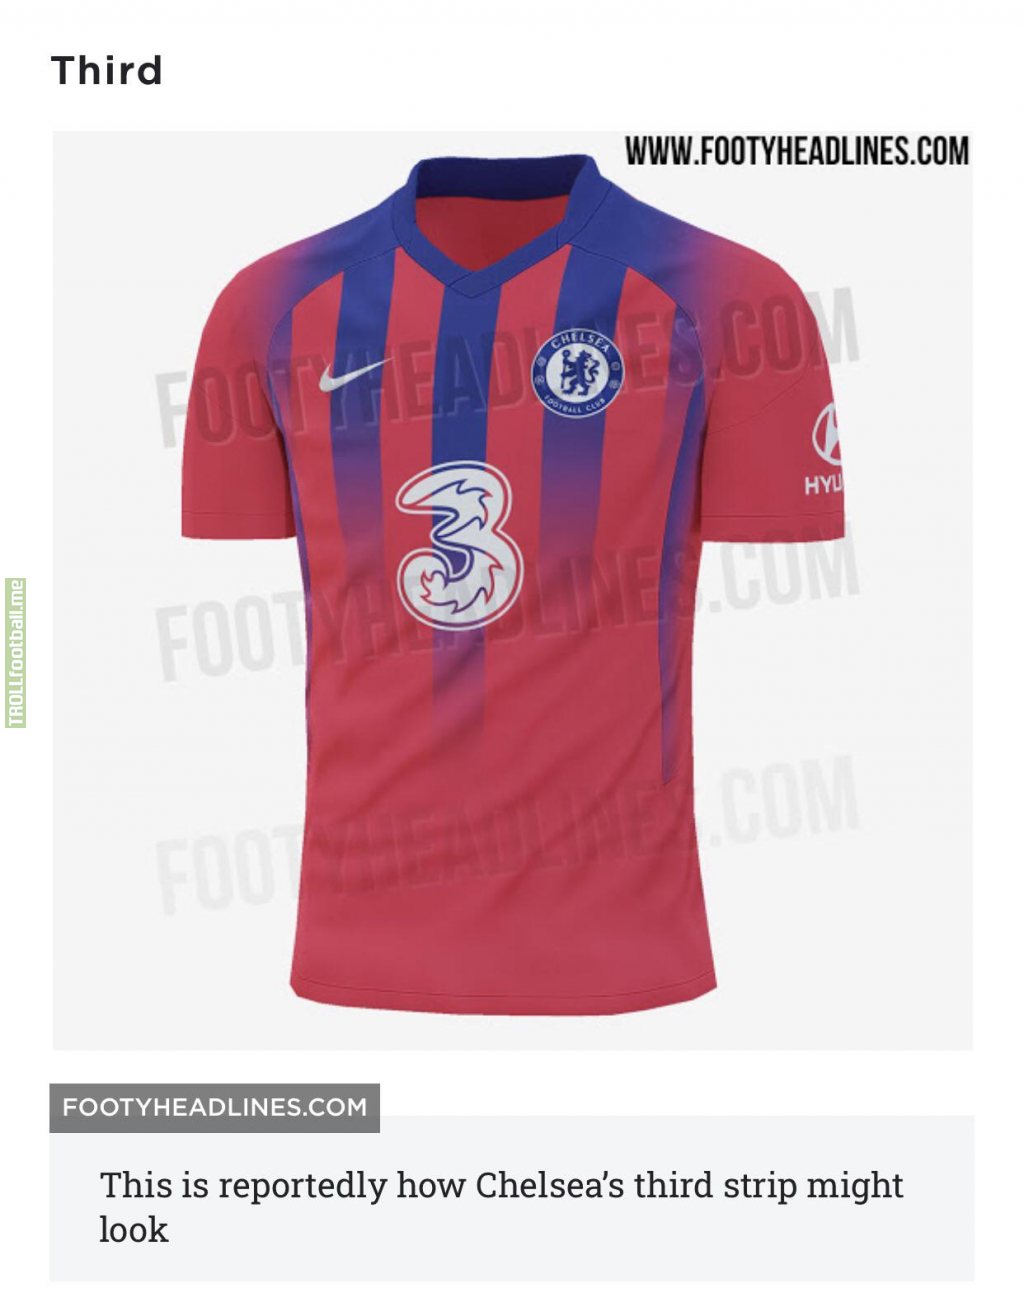 Reportedly Chelsea 3rd kit. Palace fans must be gutted, looks sweet.